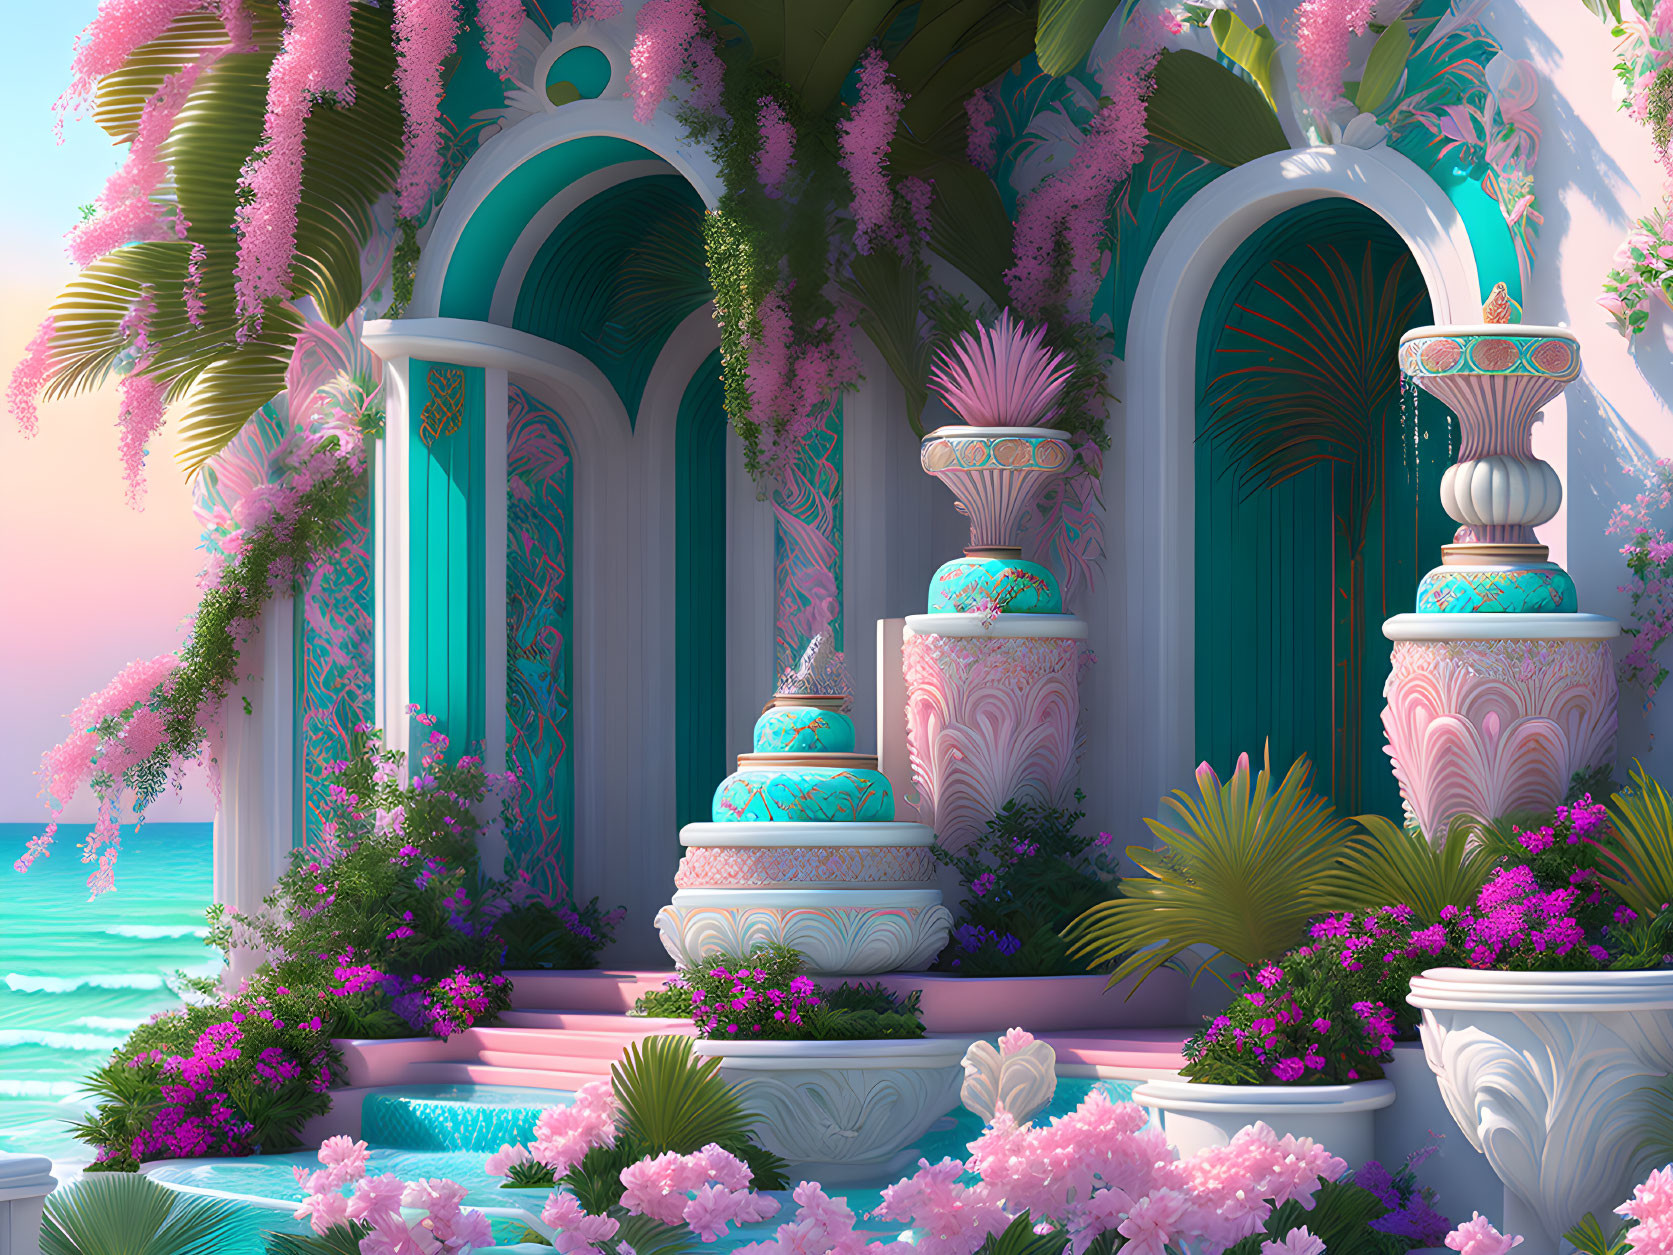 Seaside palace entrance with pink and purple flora, teal arches, and classical columns at sunrise or